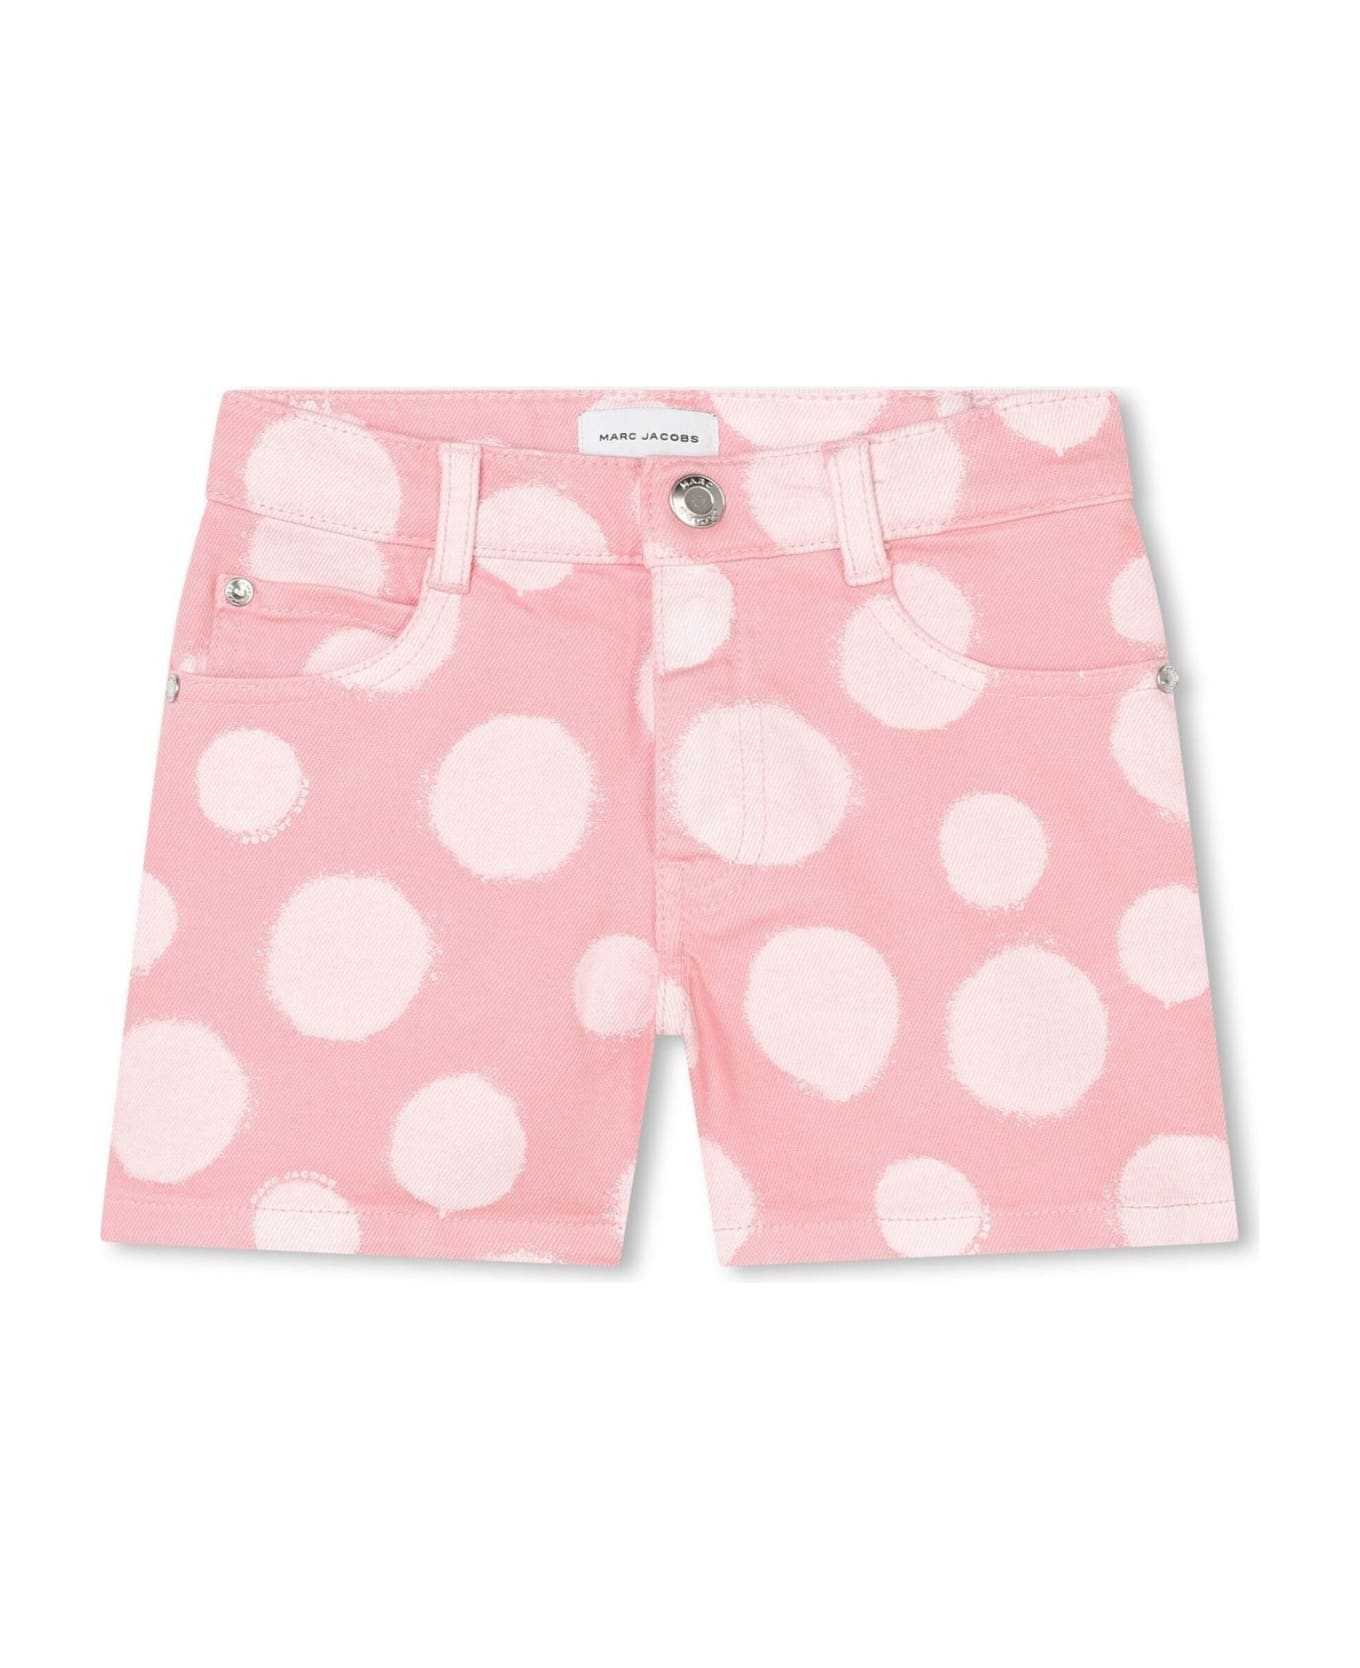 Marc Jacobs Shorts Pink - Pink